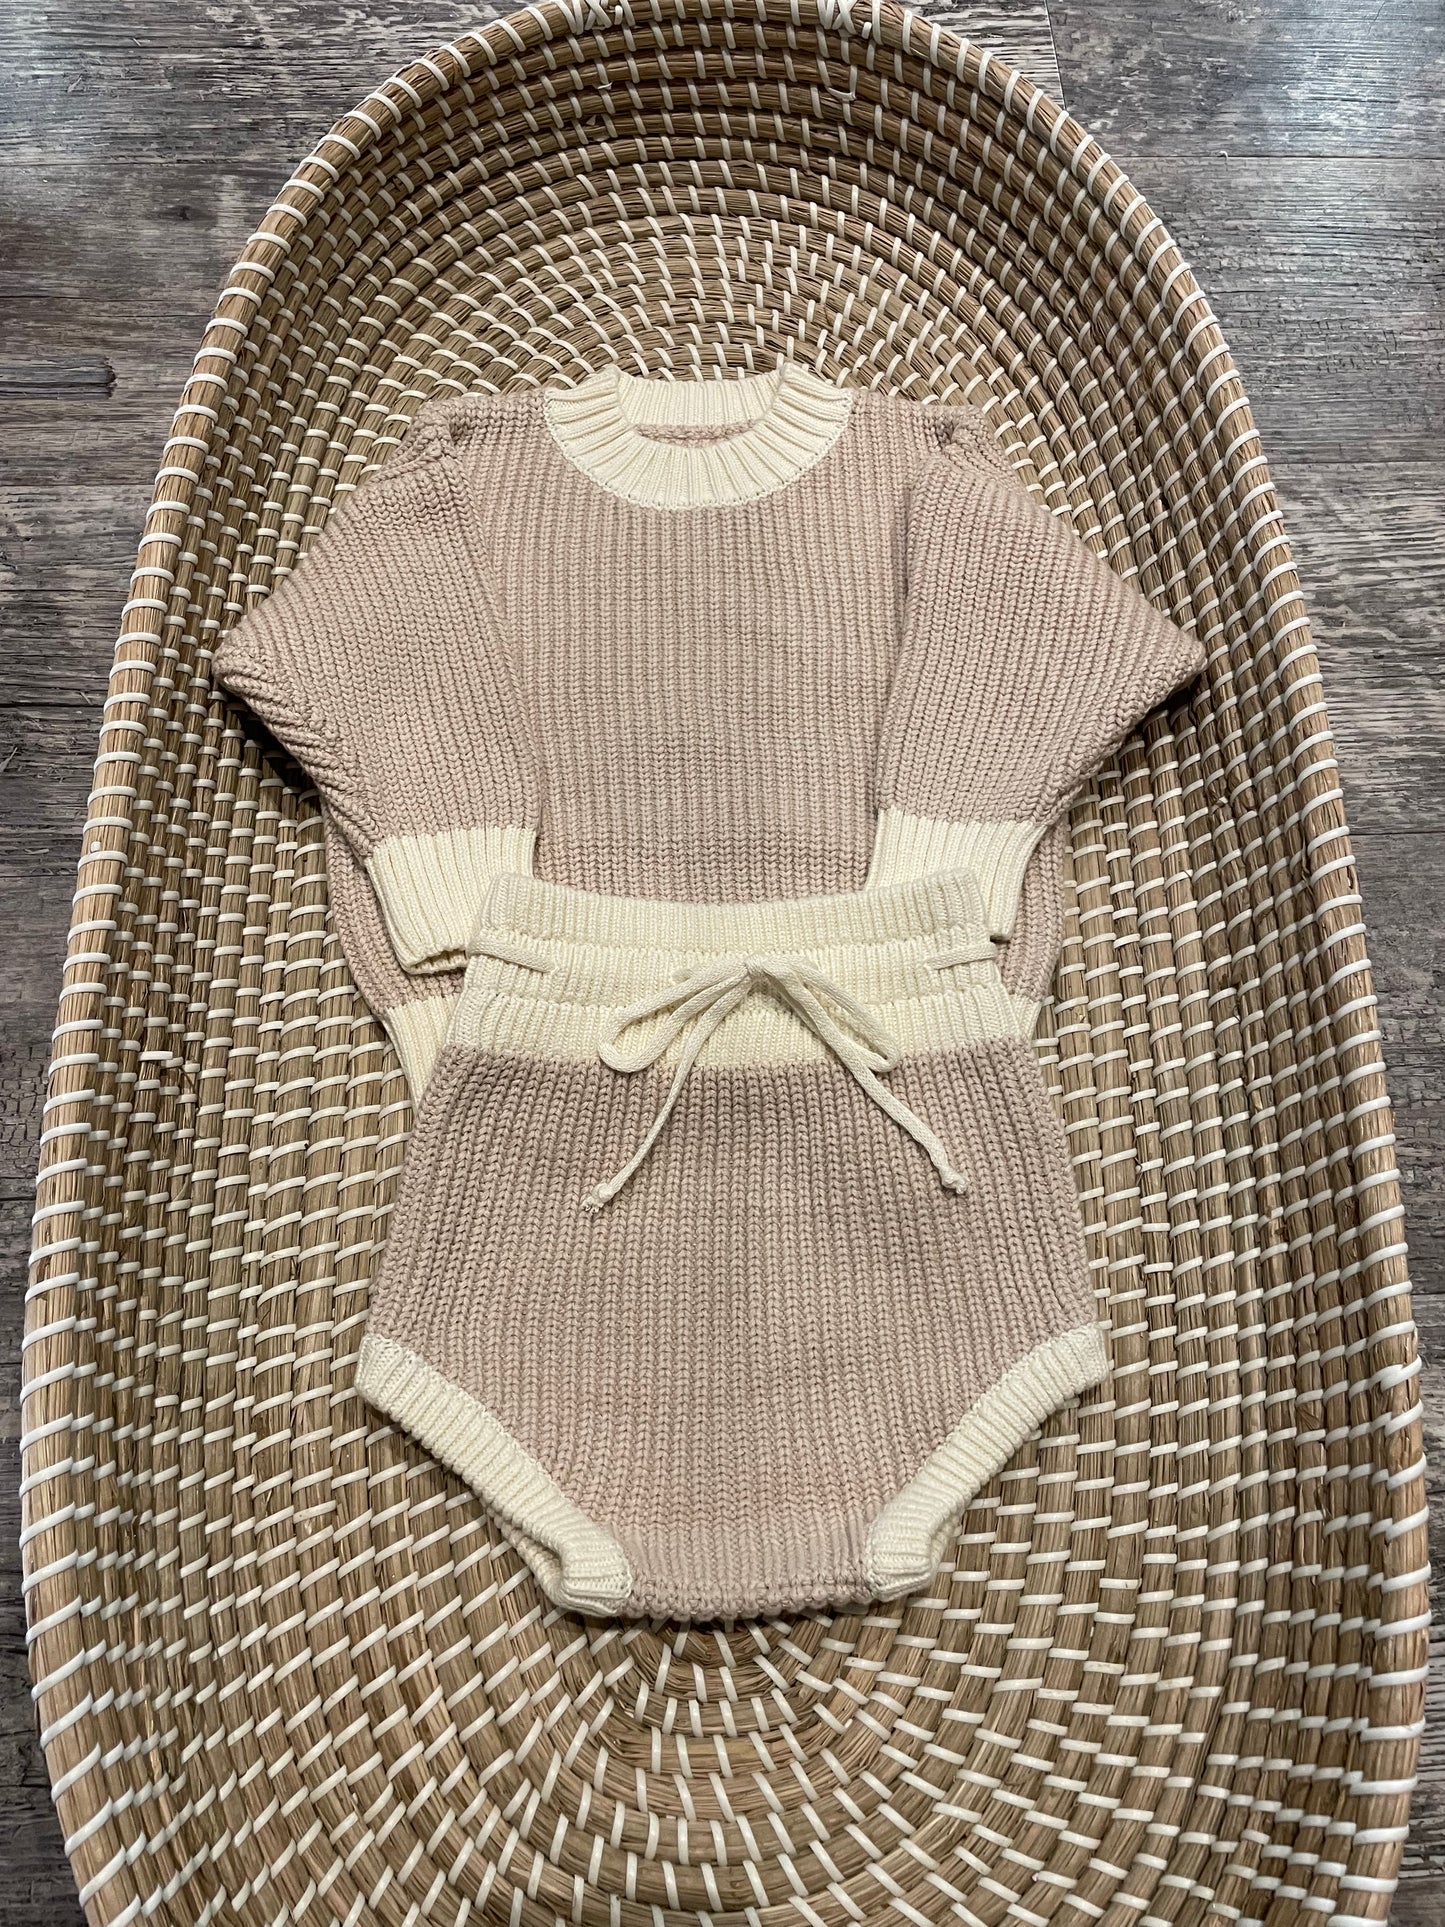 The cream and beige knitted set